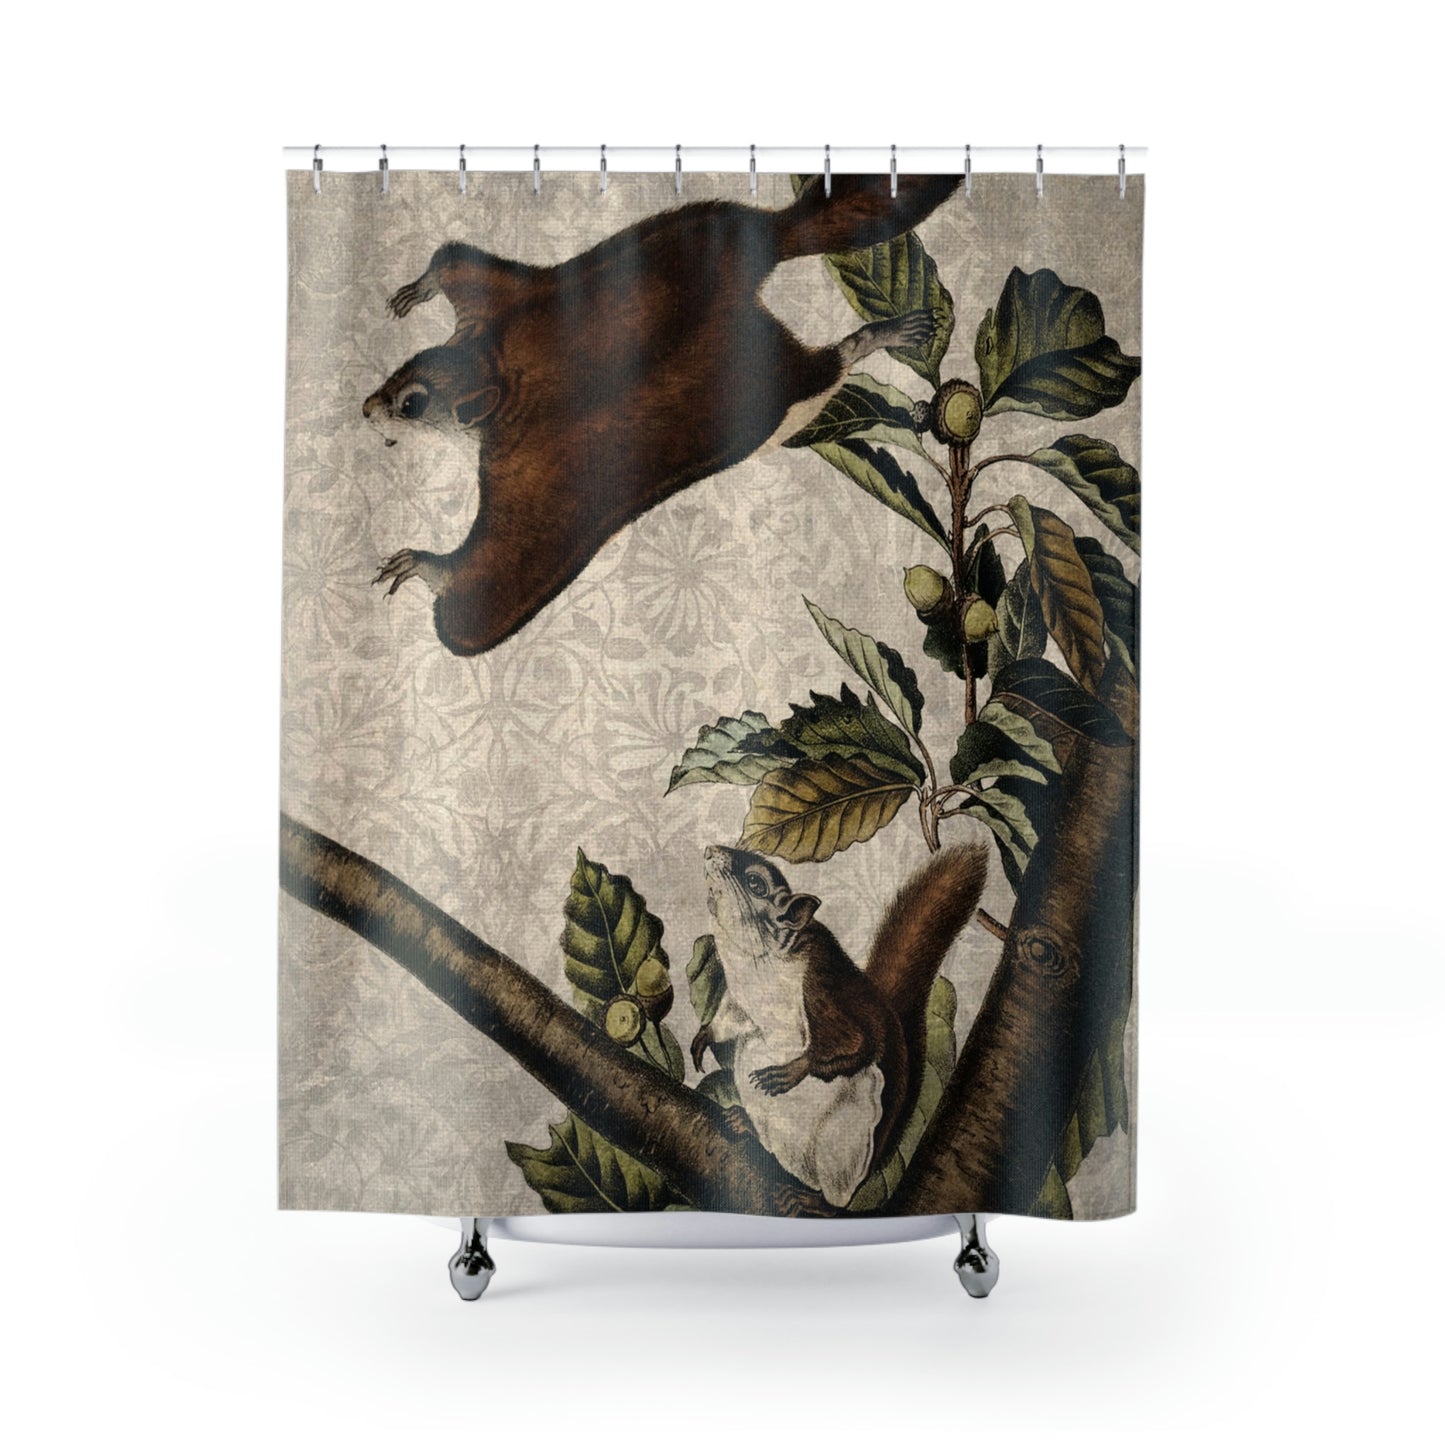 Oregon Flying Squirrel in Flight Shower Curtain - Inspired by John James Audubon (Sustainable & Recyclable)